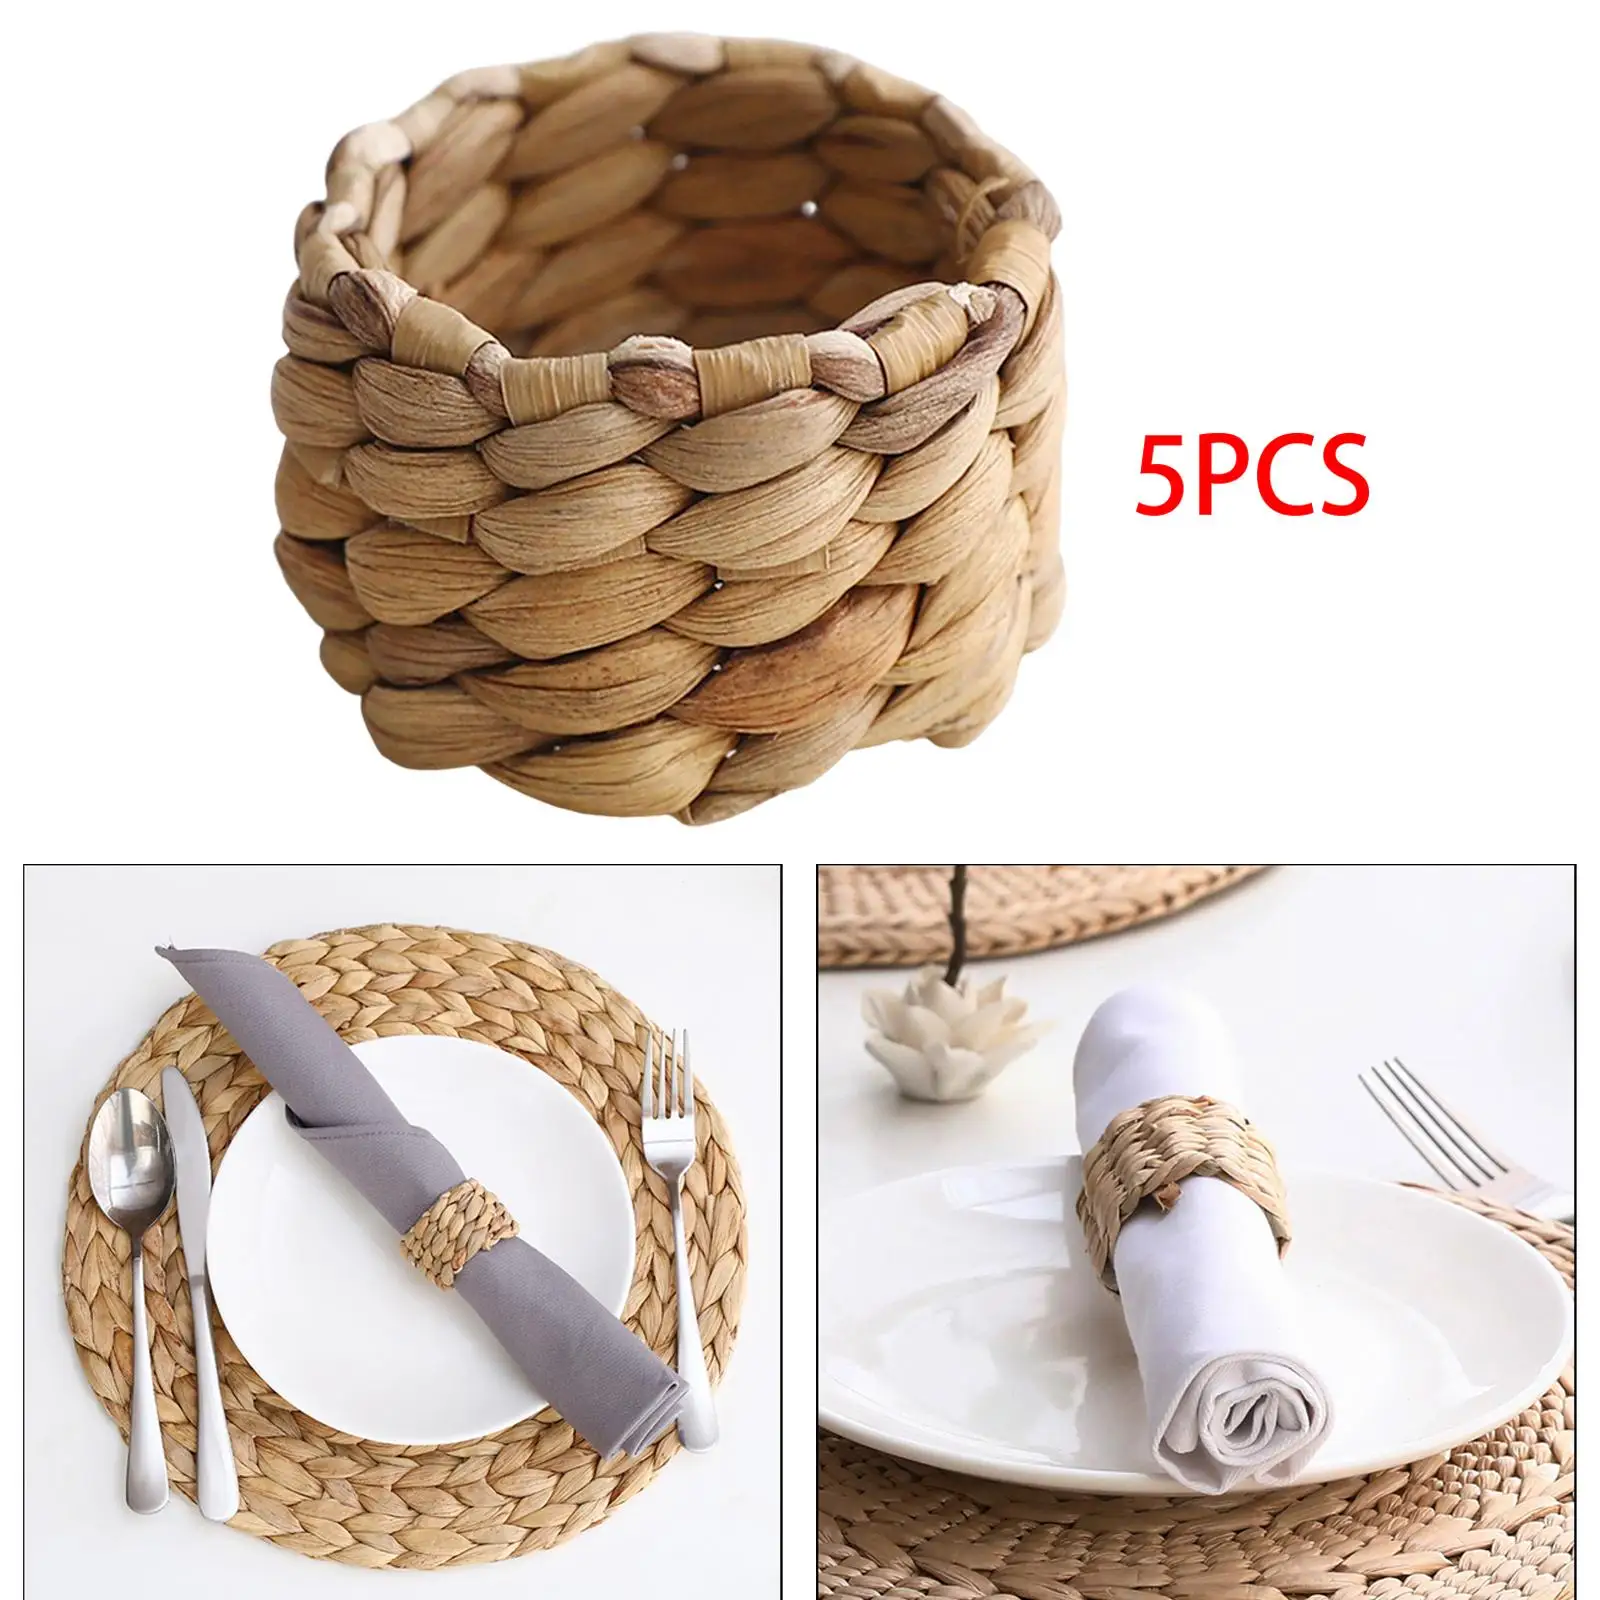 5 Pieces Napkin Ring Holders Decorative Woven Napkin Buckle Holder for Candlelight Dinner Family Special Events Gatherings Decor